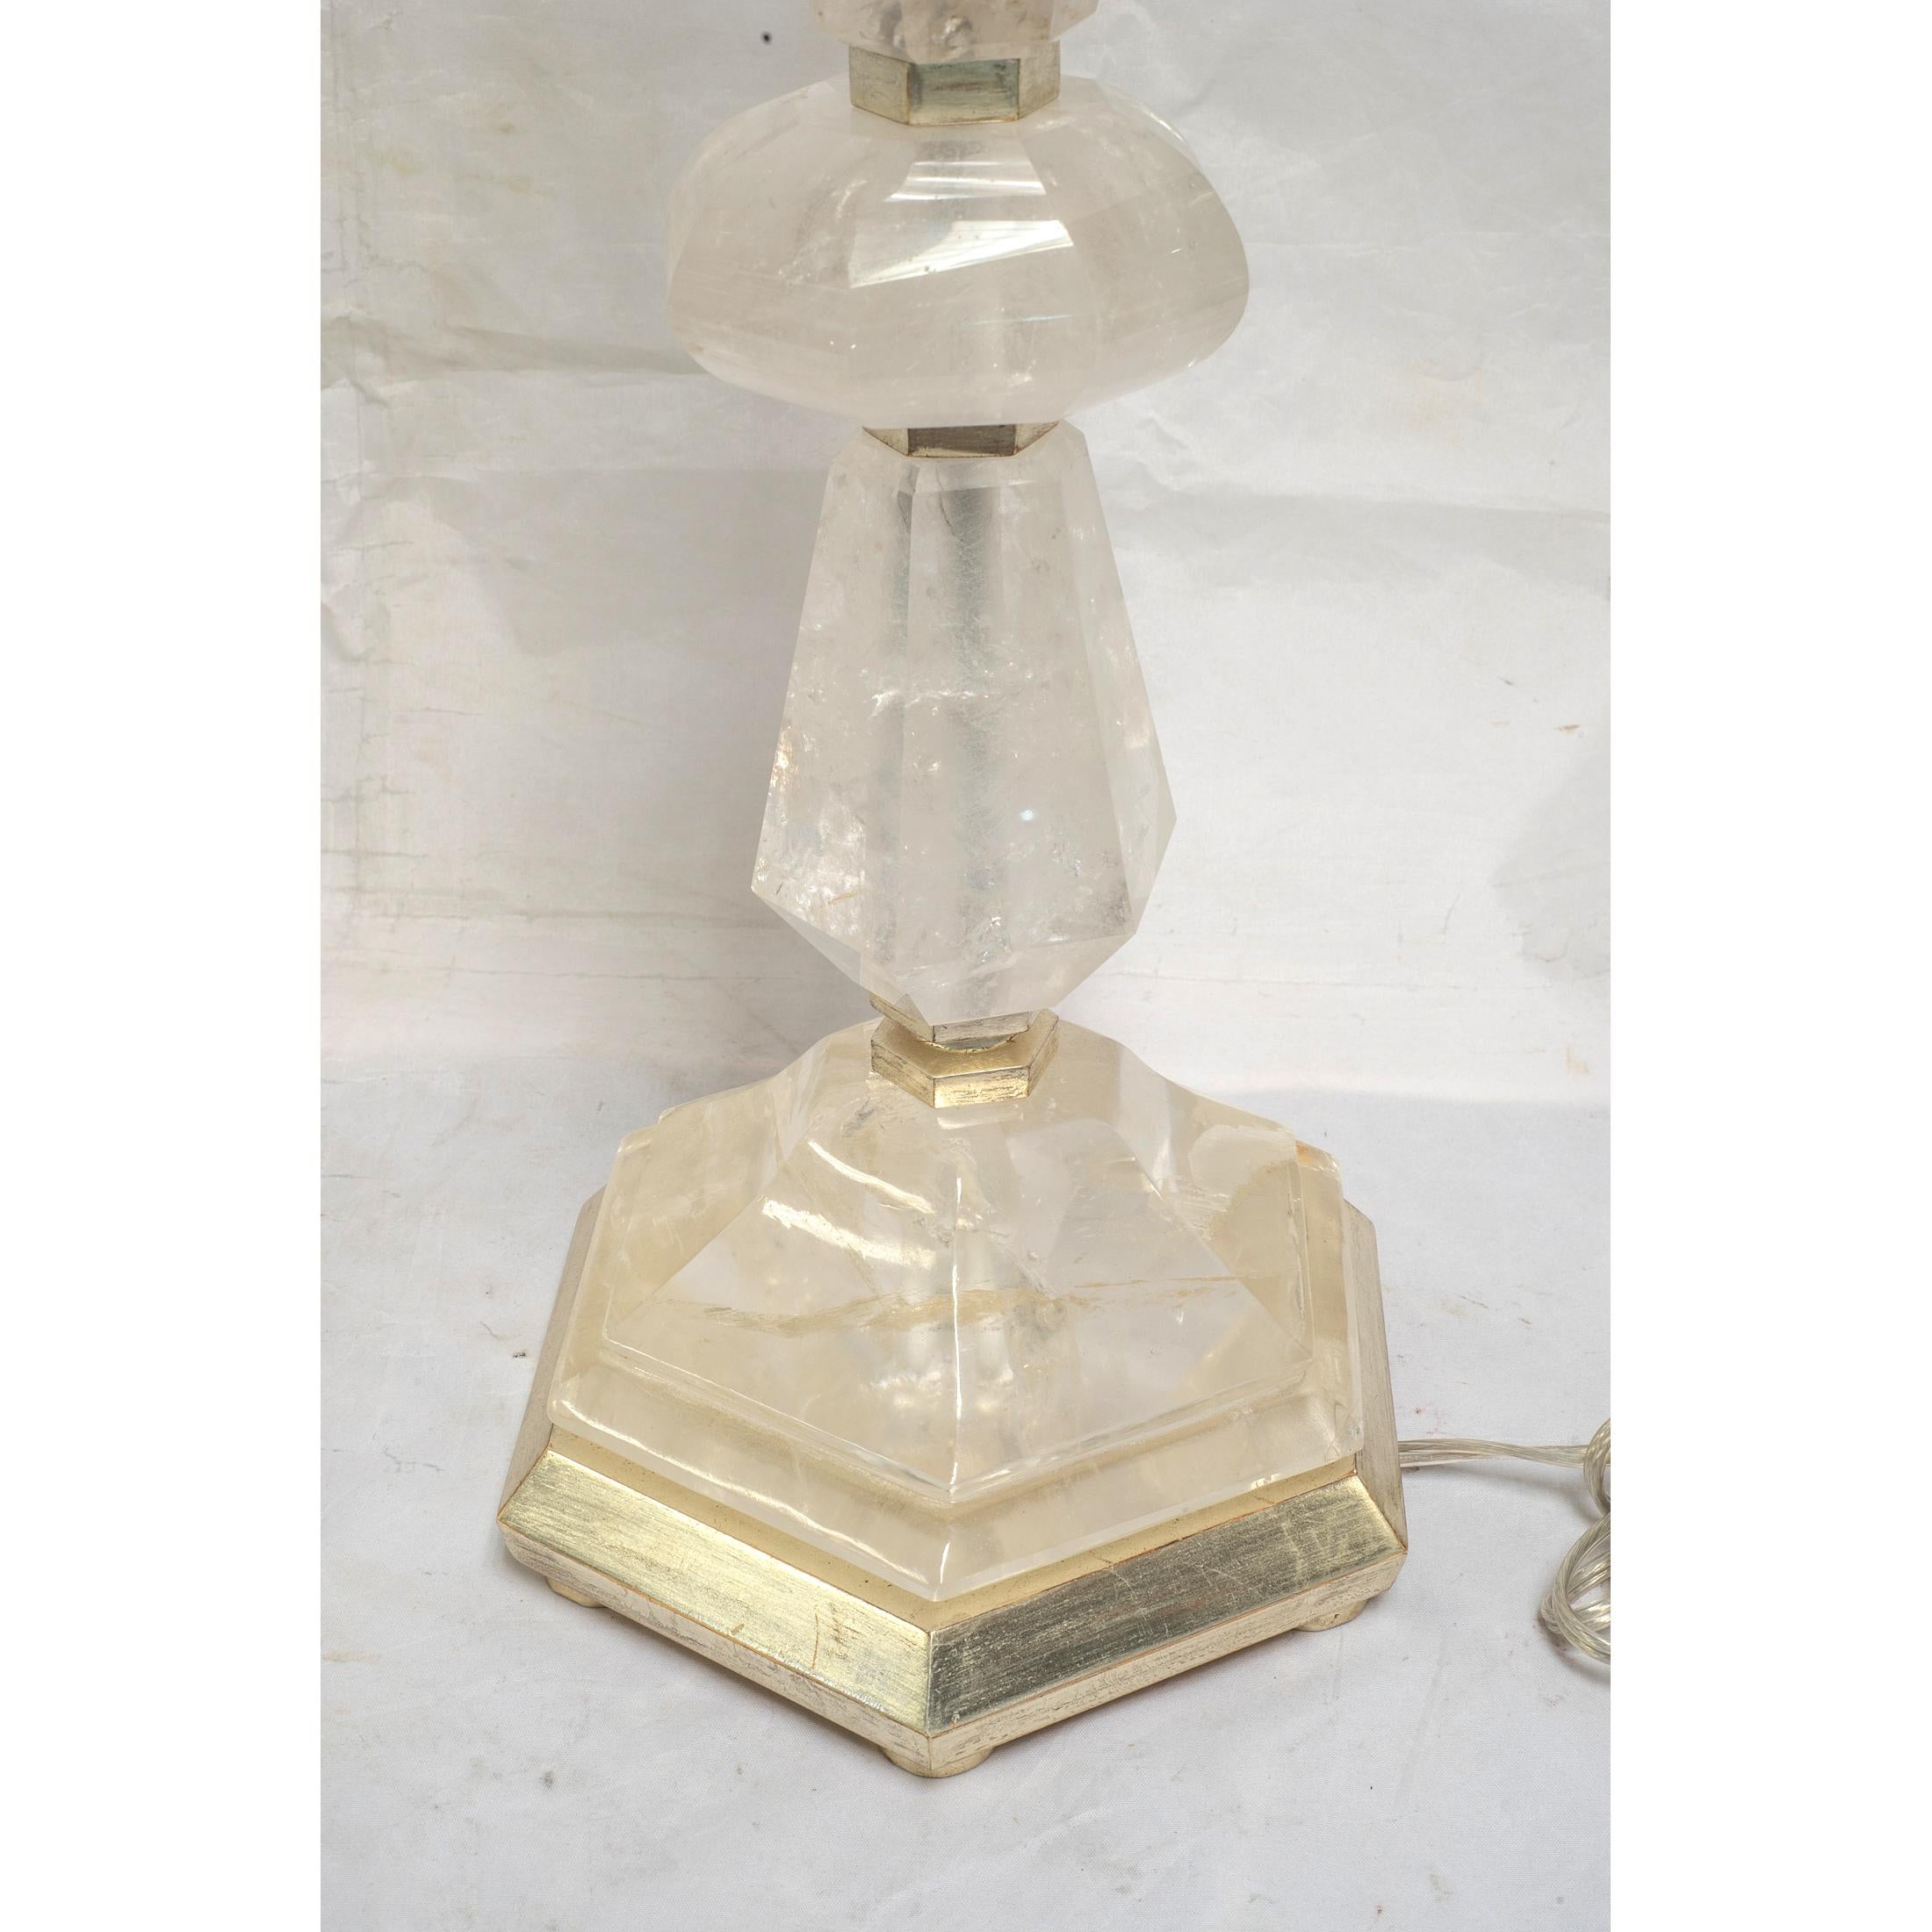 A fine pair of rock crystal candlestick form table lamps. 

Origin: French
Date: 20th century
Dimension: 33 in x 7 1/2 in x 8 3/4 in.